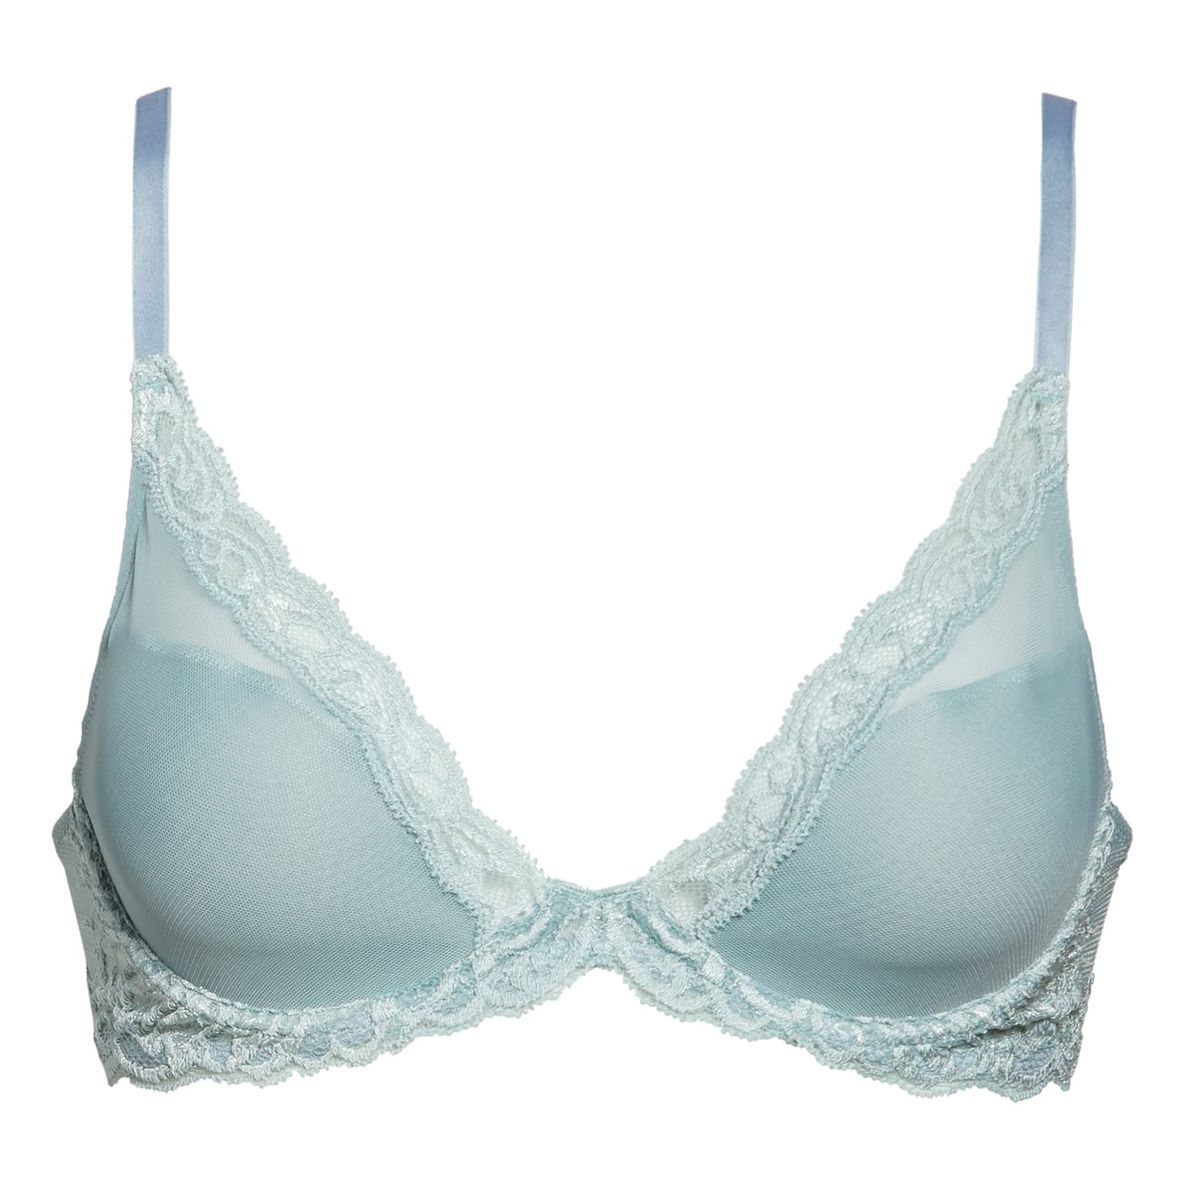 Nordstrom Anniversary Sale Natori Feathers Underwire Contour Bra Is On Sale Instyle